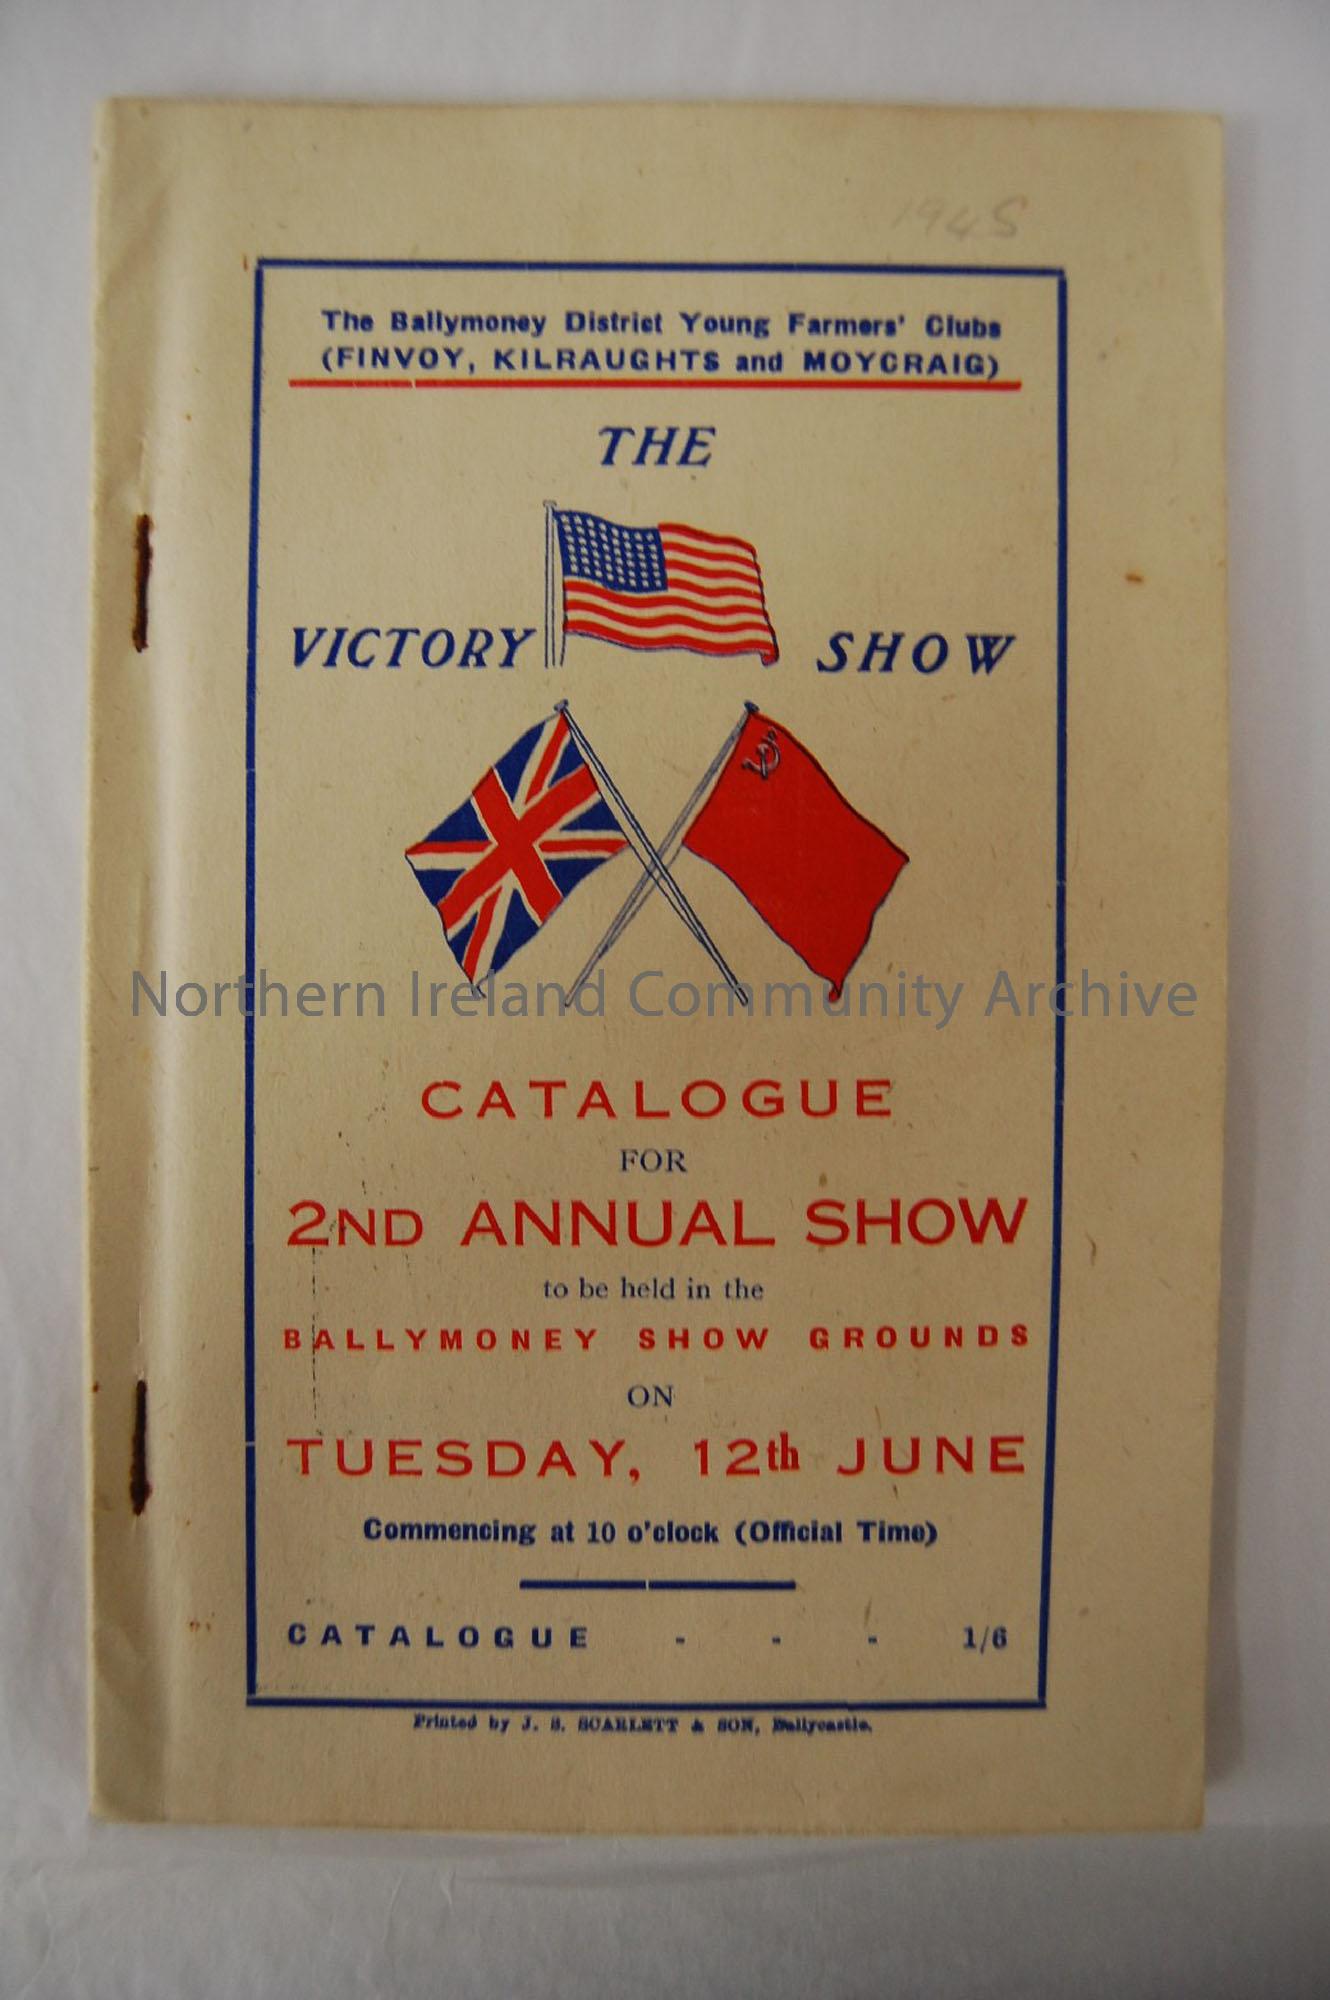 Catalogue for 1945 show. ‘Ballymoney District Young Farmers’ Clubs (Finvoy, Kilraughts & Moycraig). The Victory Show Catalogue for the second Annual S…